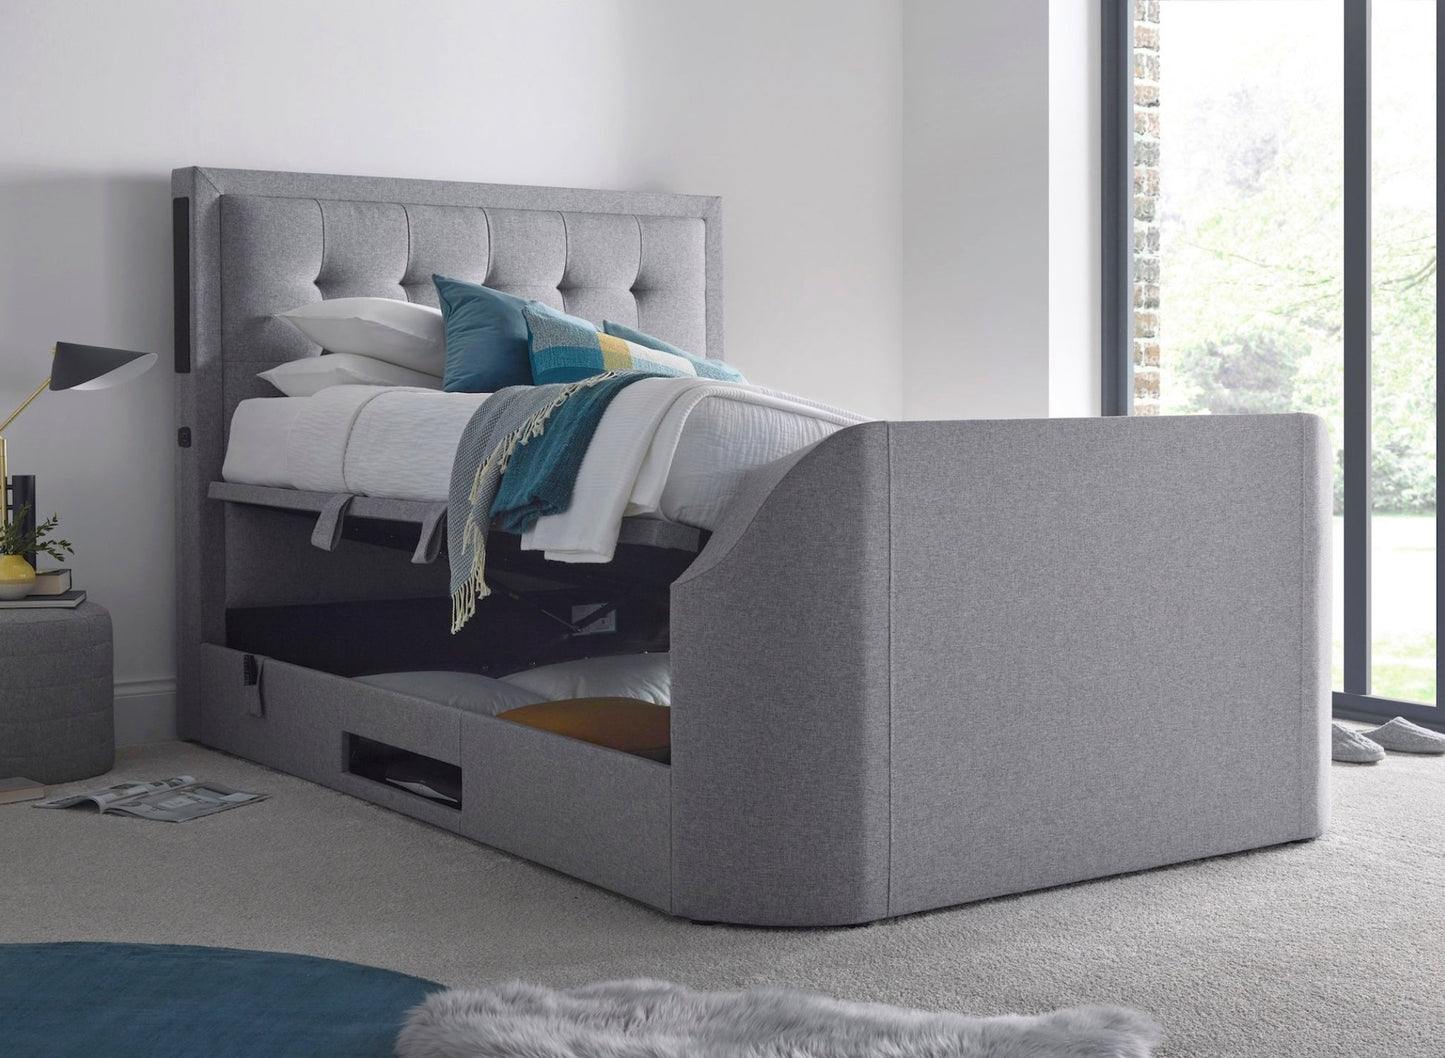 Titan 4.1 Multi Media Ottoman Storage TV Bed - King size in all colours - TV Beds Northwest - TOT150BL - greytvbed - kaydian